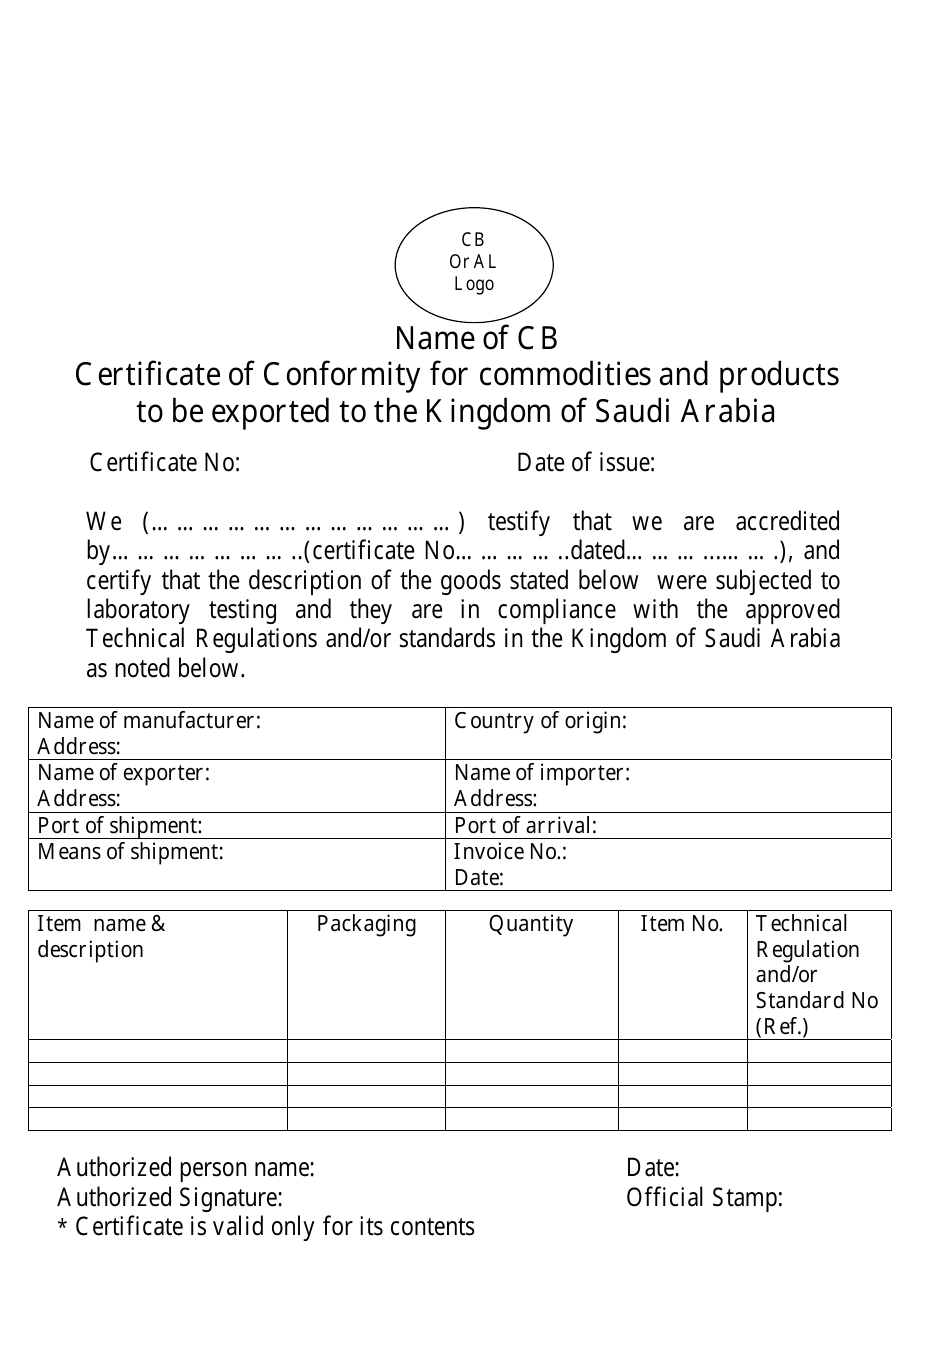 Certificate of Conformity for Commodities and Products to Be Exported to the Kingdom of Saudi Arabia - Saudi Arabia, Page 1